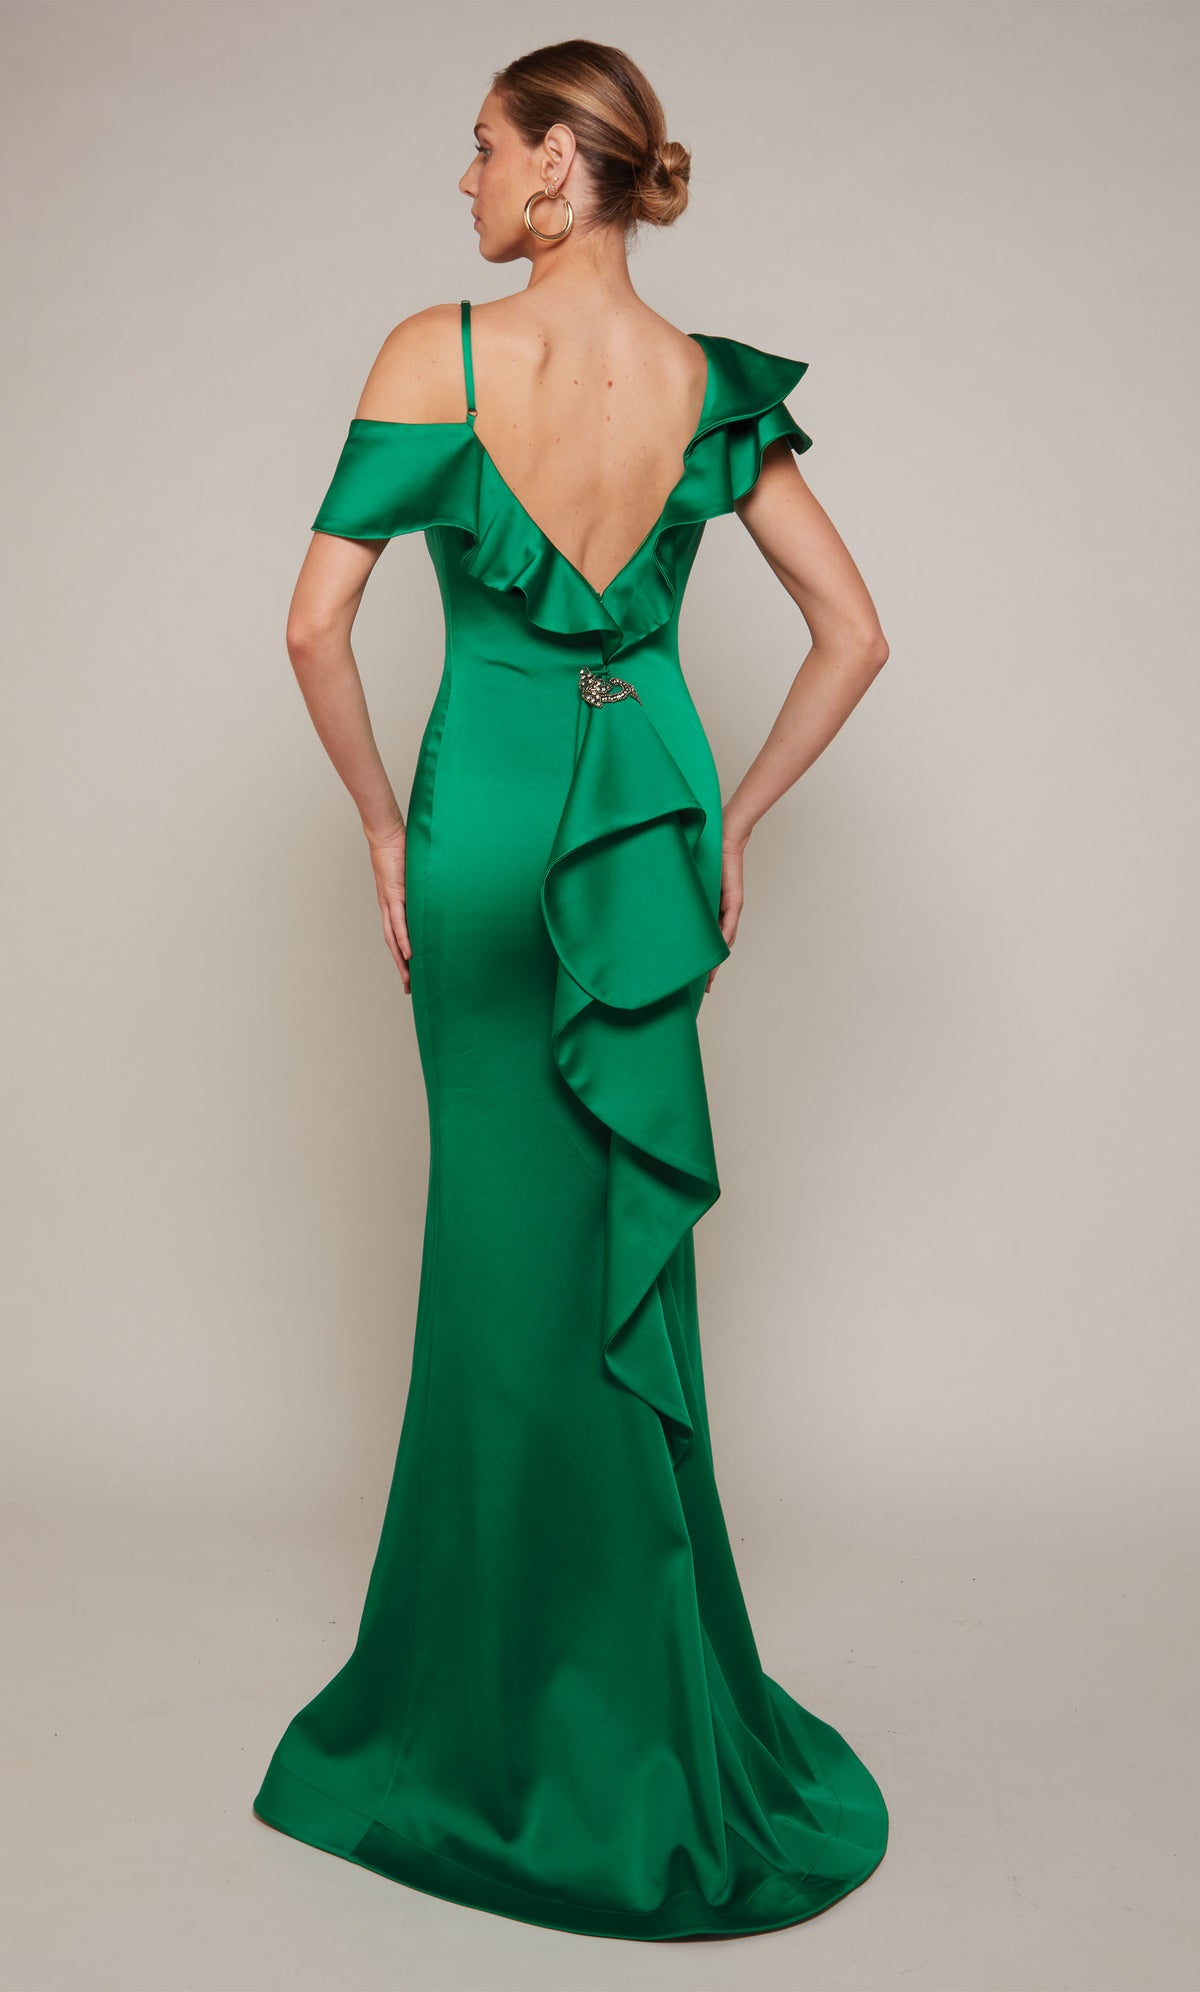 A satin formal dress with a V-shaped open back, ruffle detail, and a slight train in emerald green.